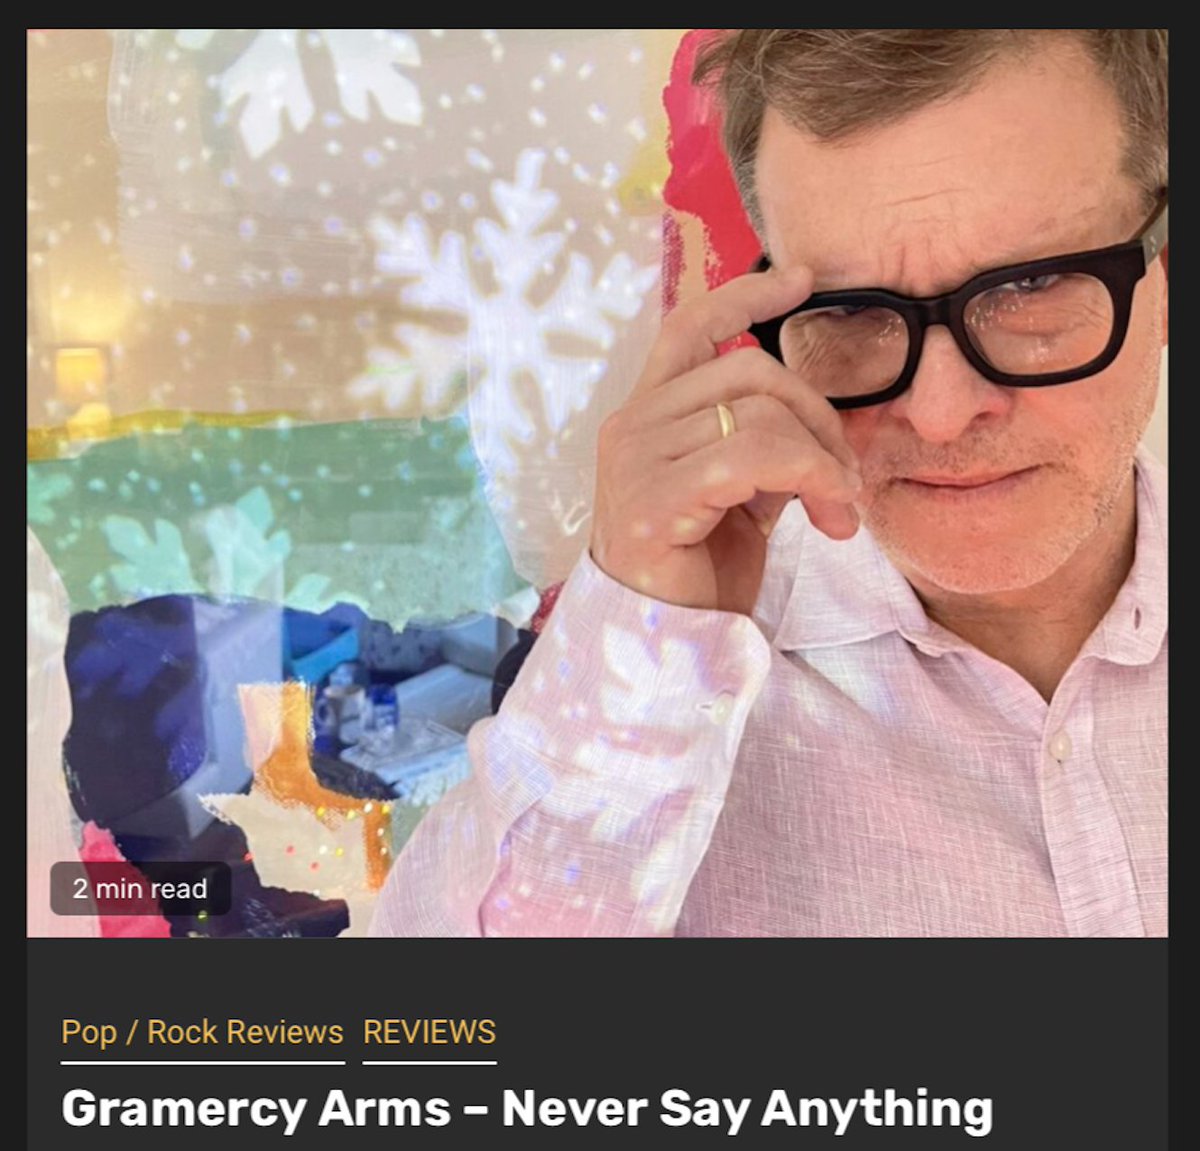 Thanks so much #SkylightWebzine @BillyYfantis for such a cool review of @GramercyArms' latest music ~ skylight.gr/index.php/2024… @musicblogrt @_TeamBlogger @itheretweeter1 @musiccitymemo via @ShamelessPR_

New 'The Making Of The Making Of' album available at gramercyarms1.bandcamp.com